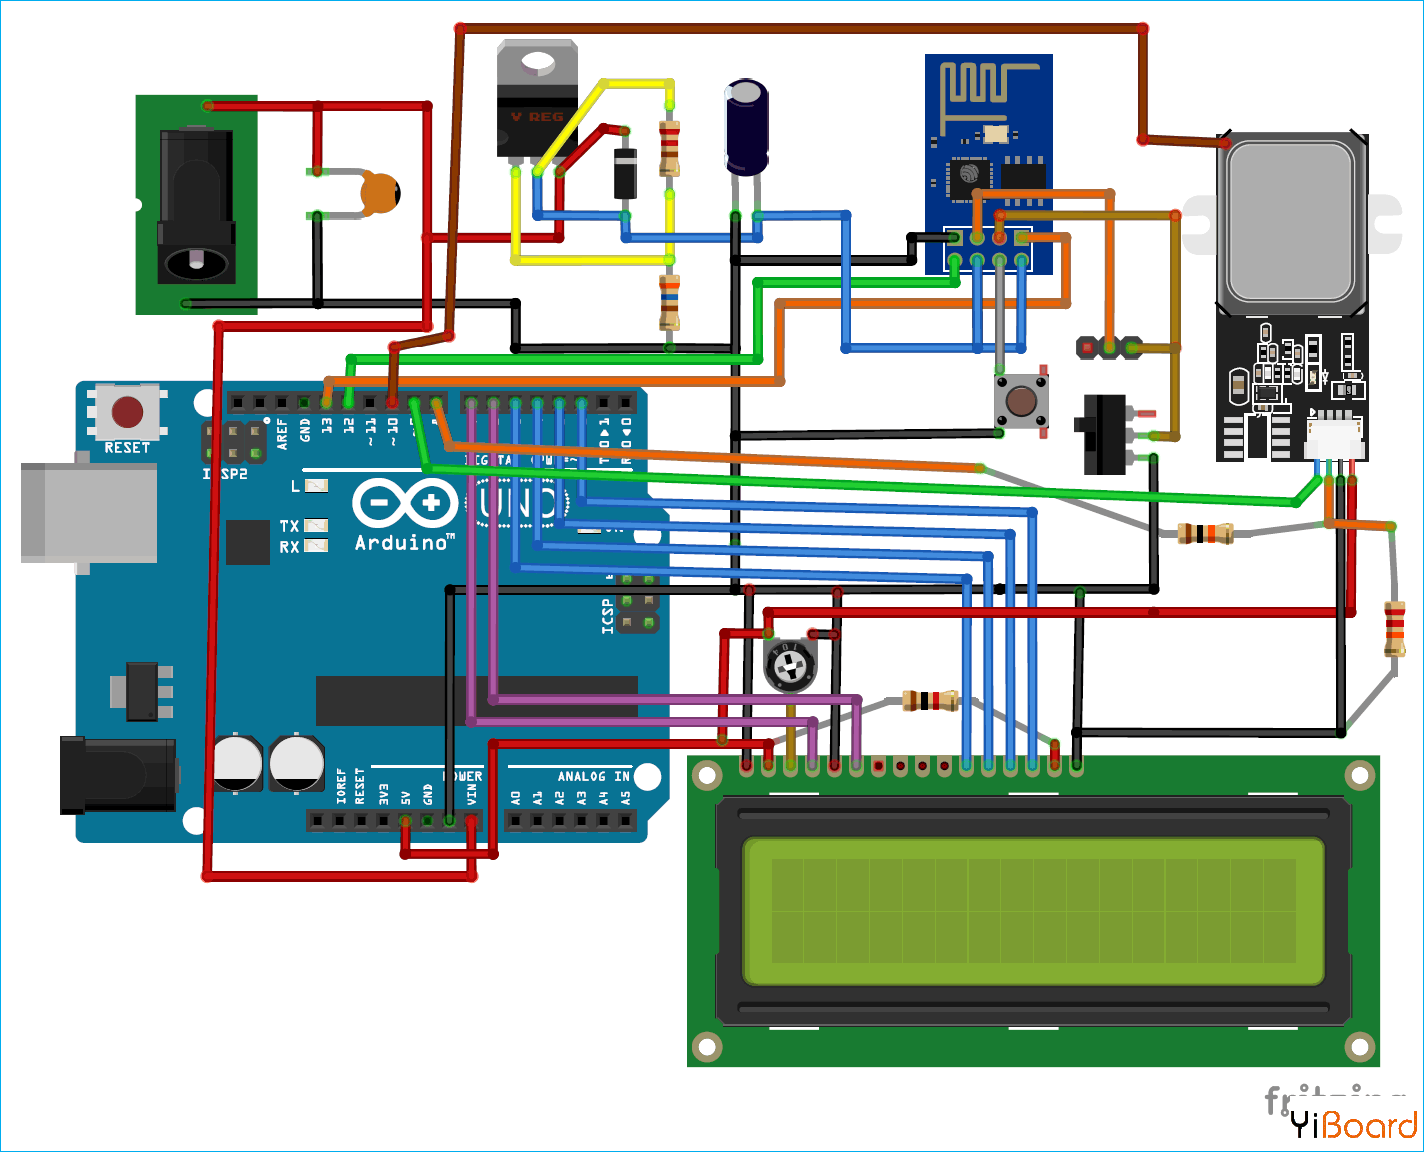 Circuit-Diagram-for-IoT-based-Biometric-Attendance-System-using-Arduino-and-Thin.png